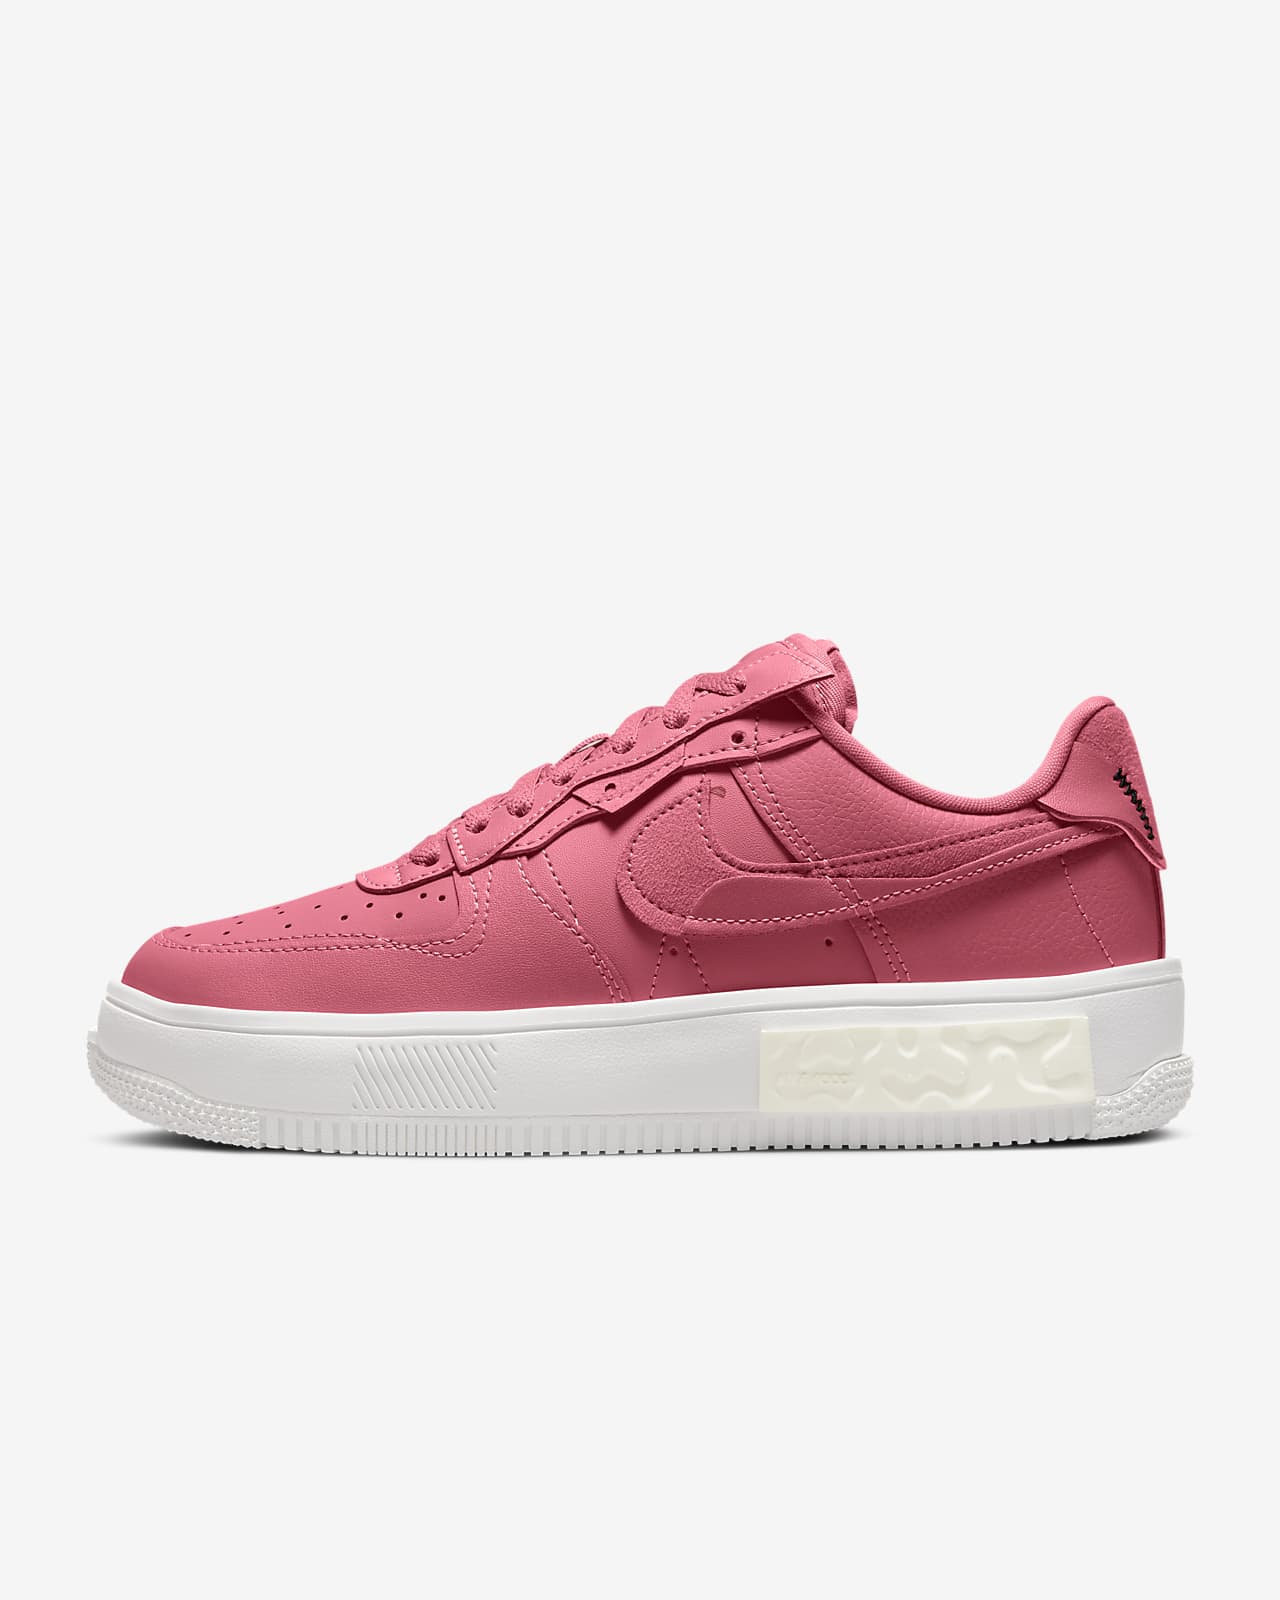 nike femme chaussures air force one بابايا جده